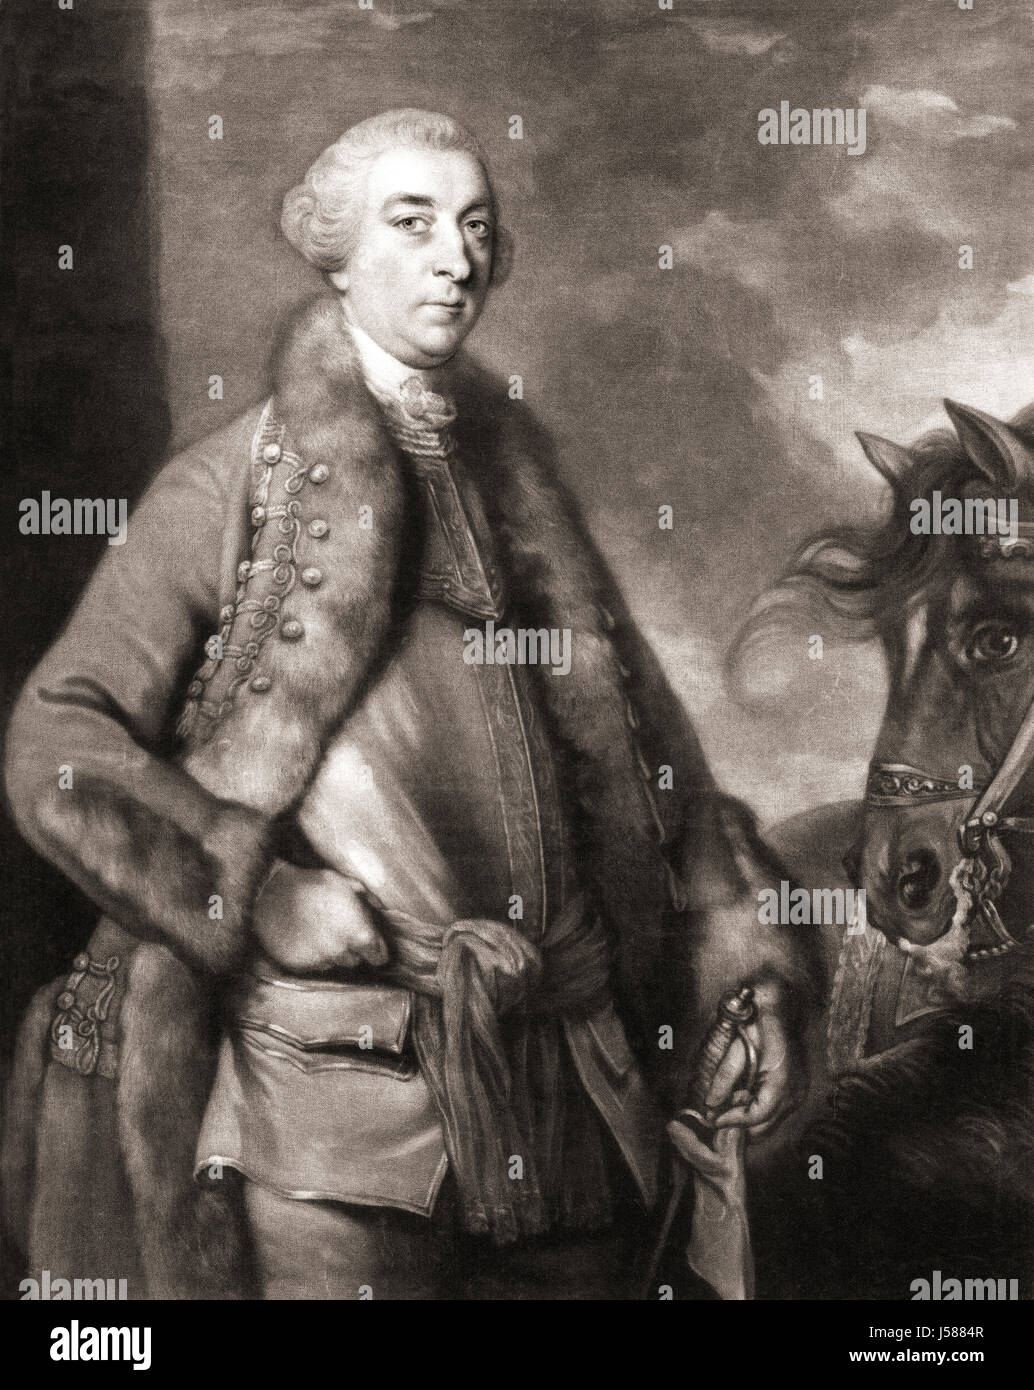 George Germain, 1st Viscount Sackville, 1716 - 1785, aka The Honourable George Sackville until 1720, Lord George Sackville from 1720 to 1770 and Lord George Germain from 1770 to 1782.  British soldier and politician. Stock Photo